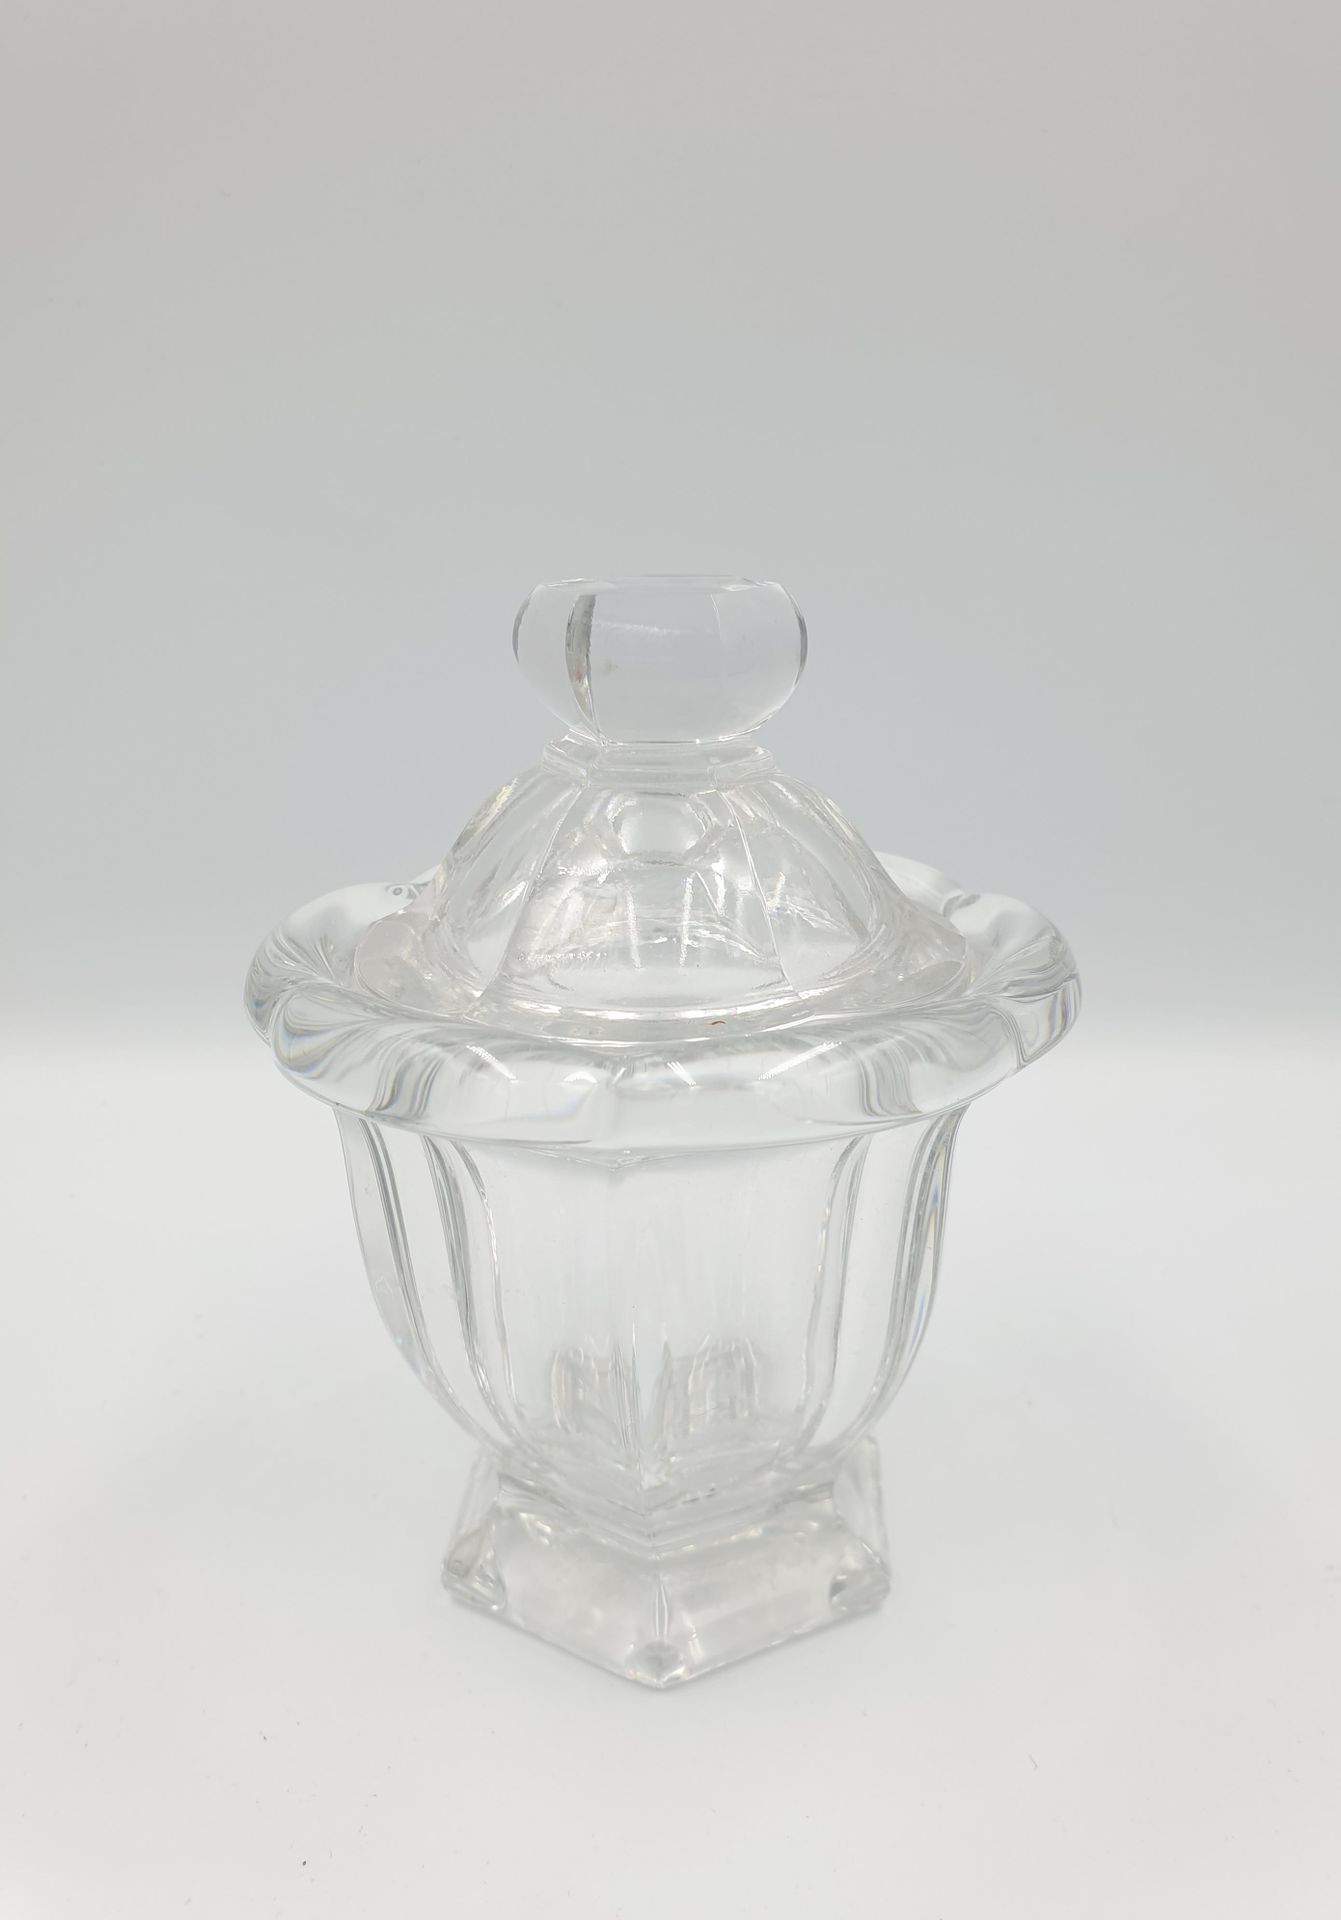 Null BACCARAT : 

Moutardier aus Kristall

H. 11 cm